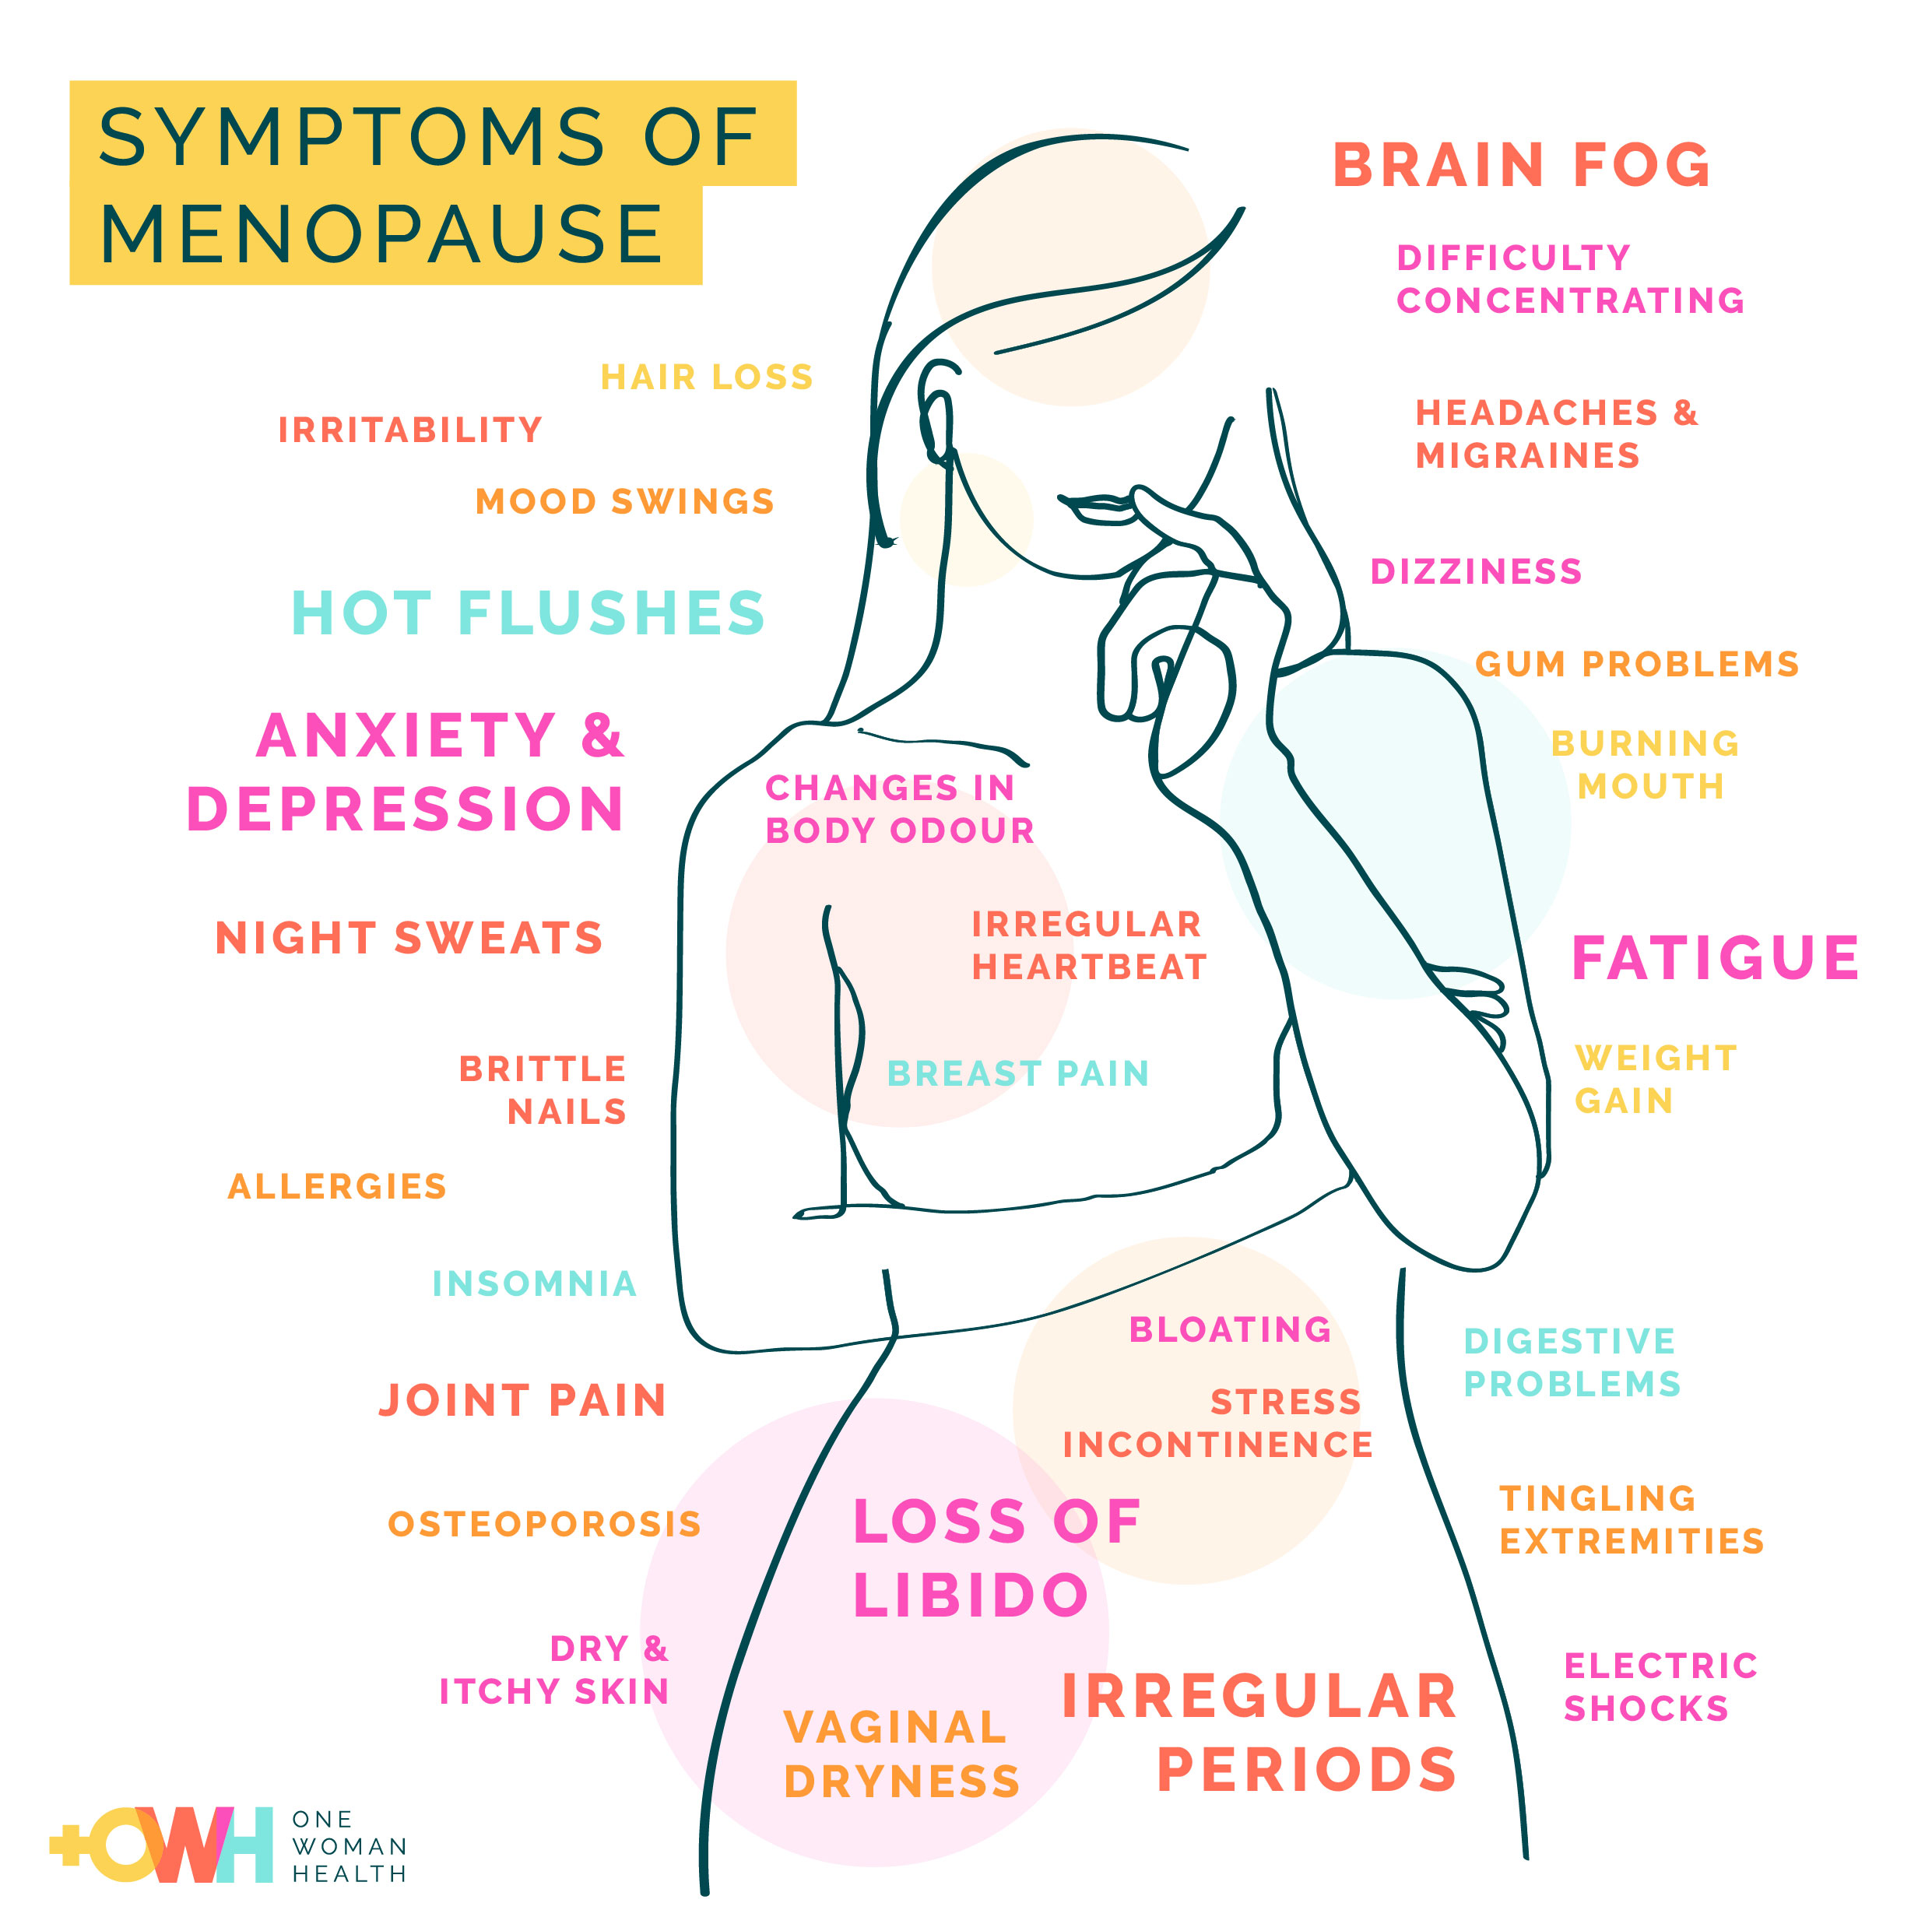 What Are The Symptoms Of The Menopause One Woman Health